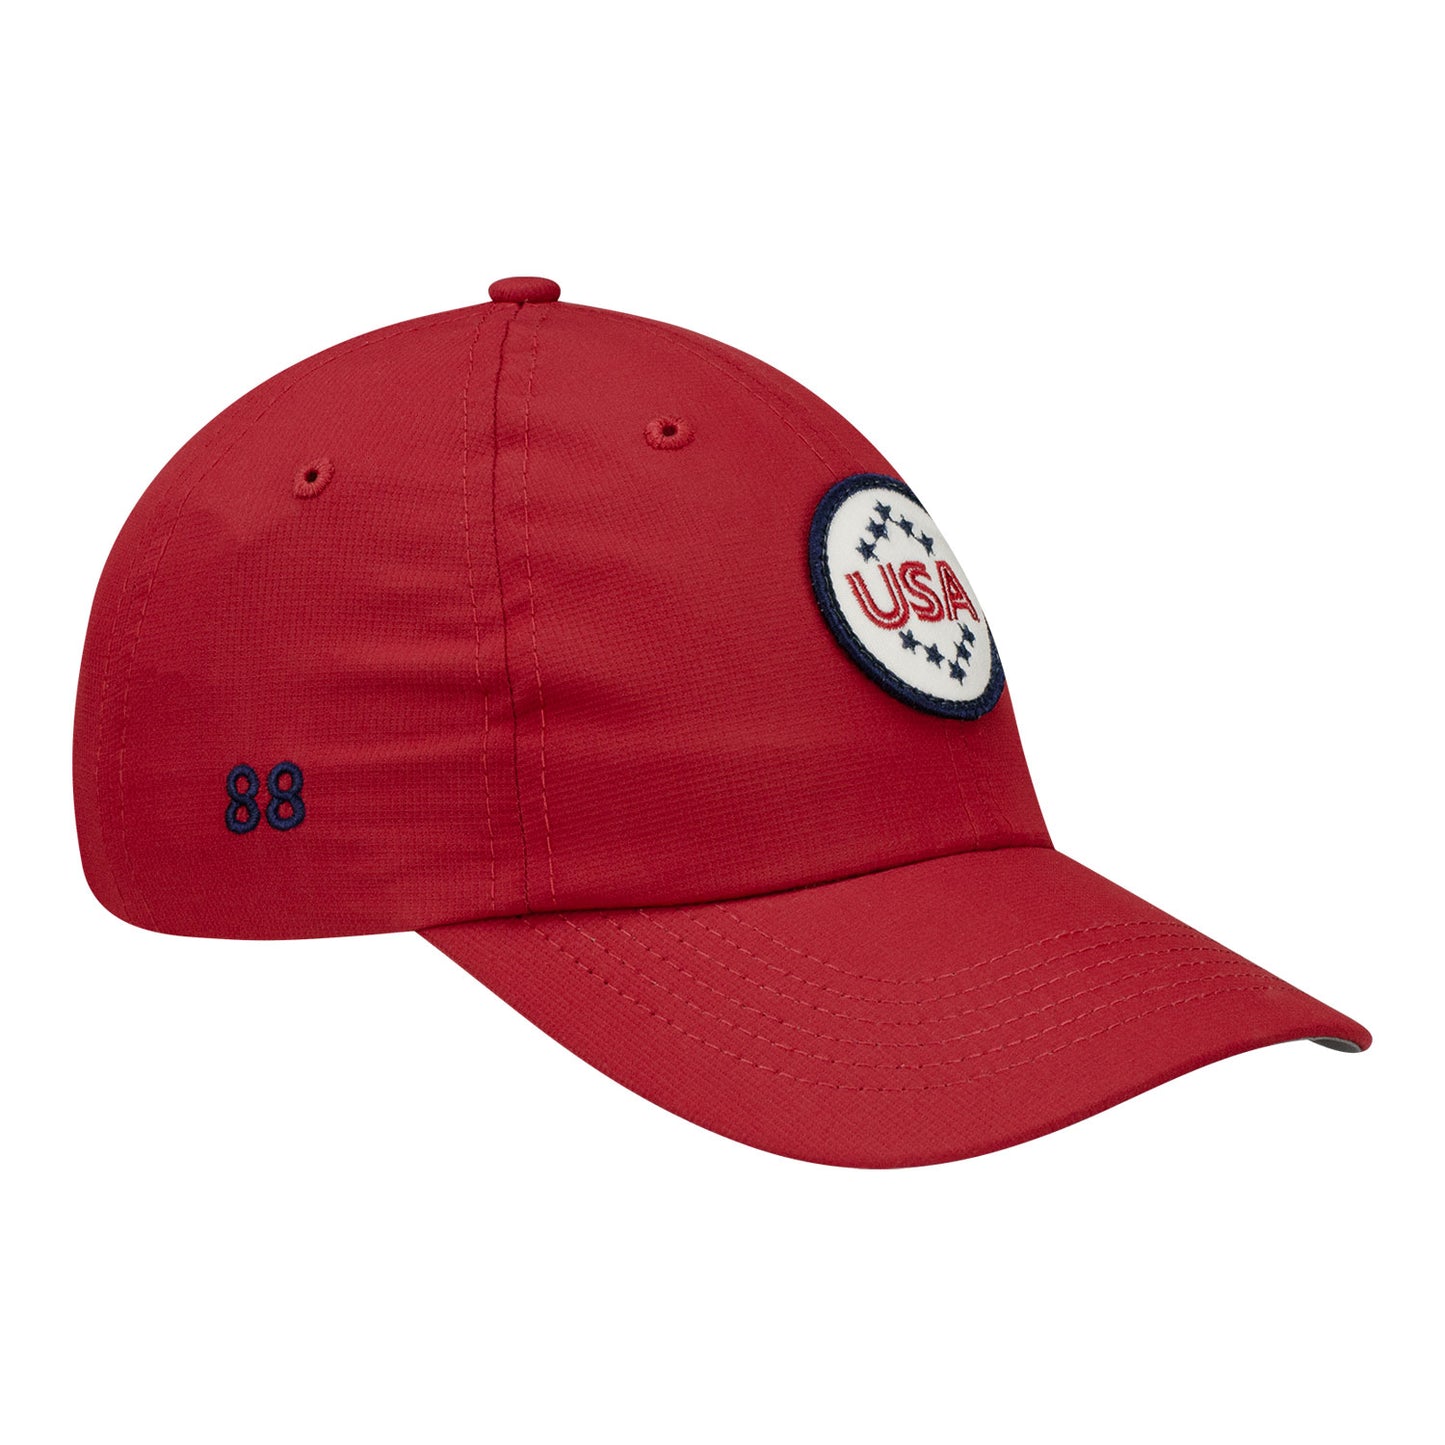 Imperial 2023 LPGA Official Solheim Cup Team Hat in Red Pepper - Angled Right Side View